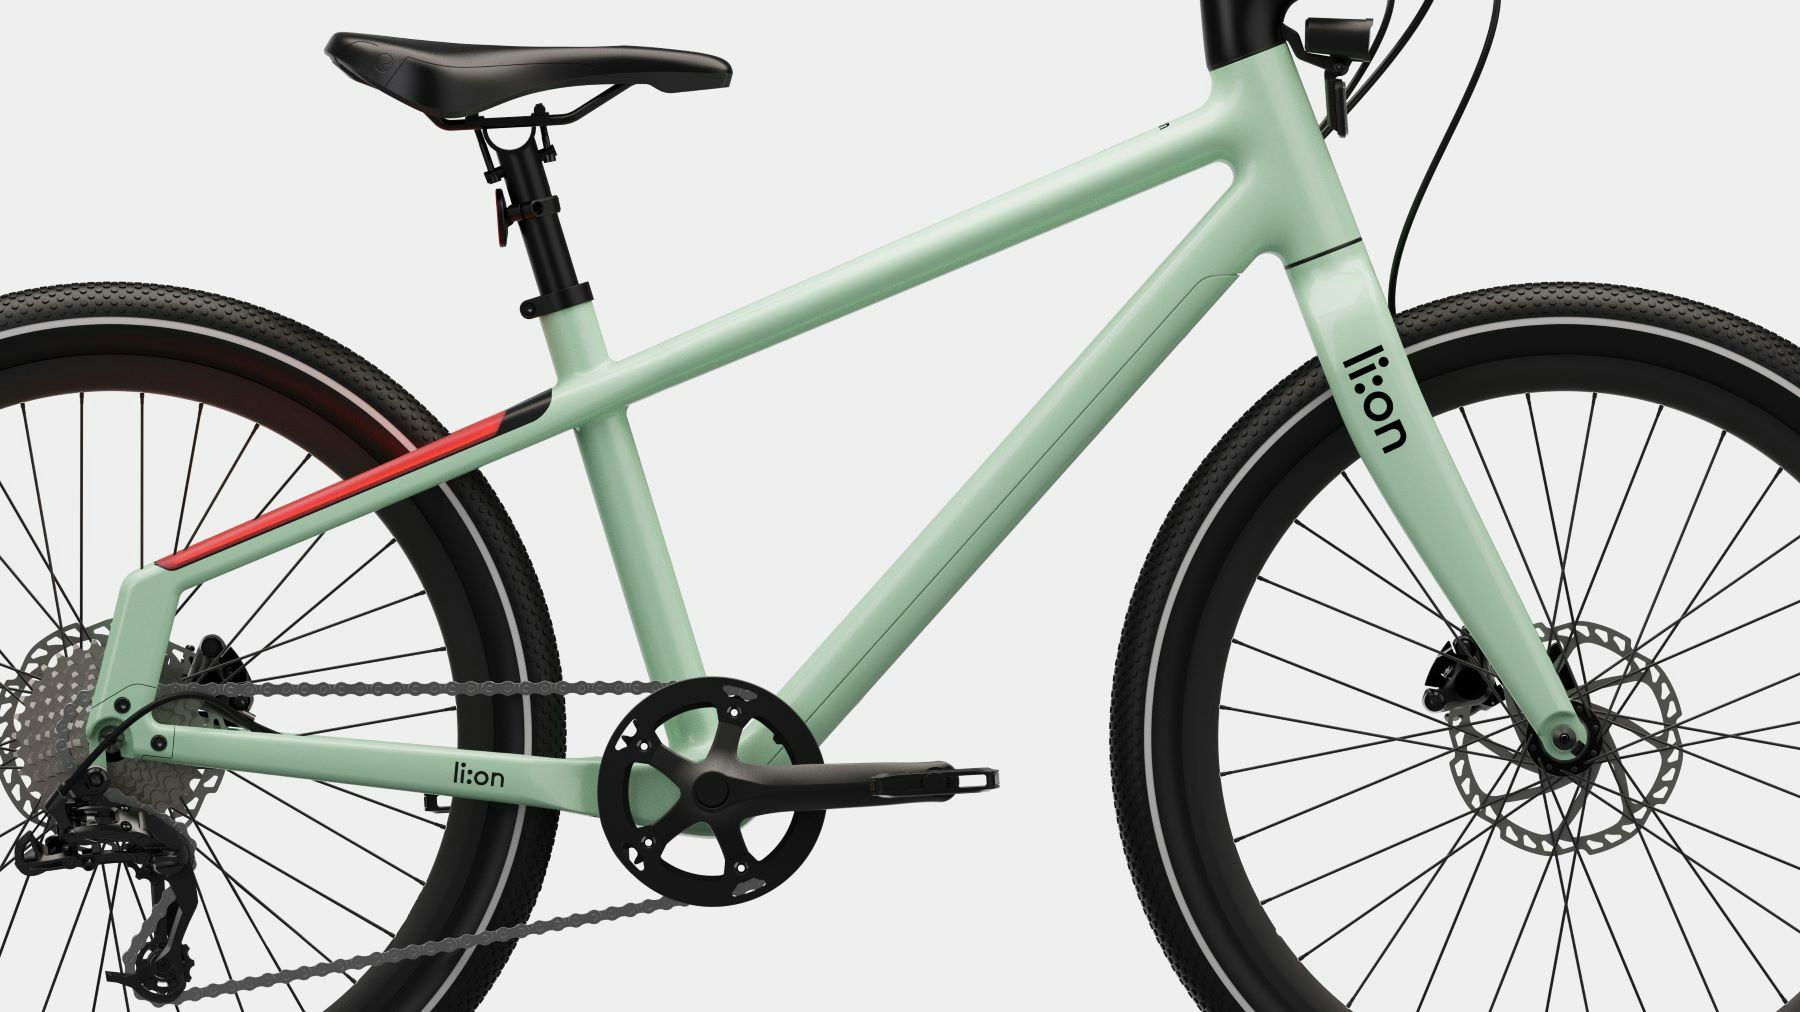 Weber Fibertech currently counts 10 OEM’s as clients for bicycle components, including newcomer li:on bikes who was looking for a sustainably produced frame. – Photo Weber Fibertech